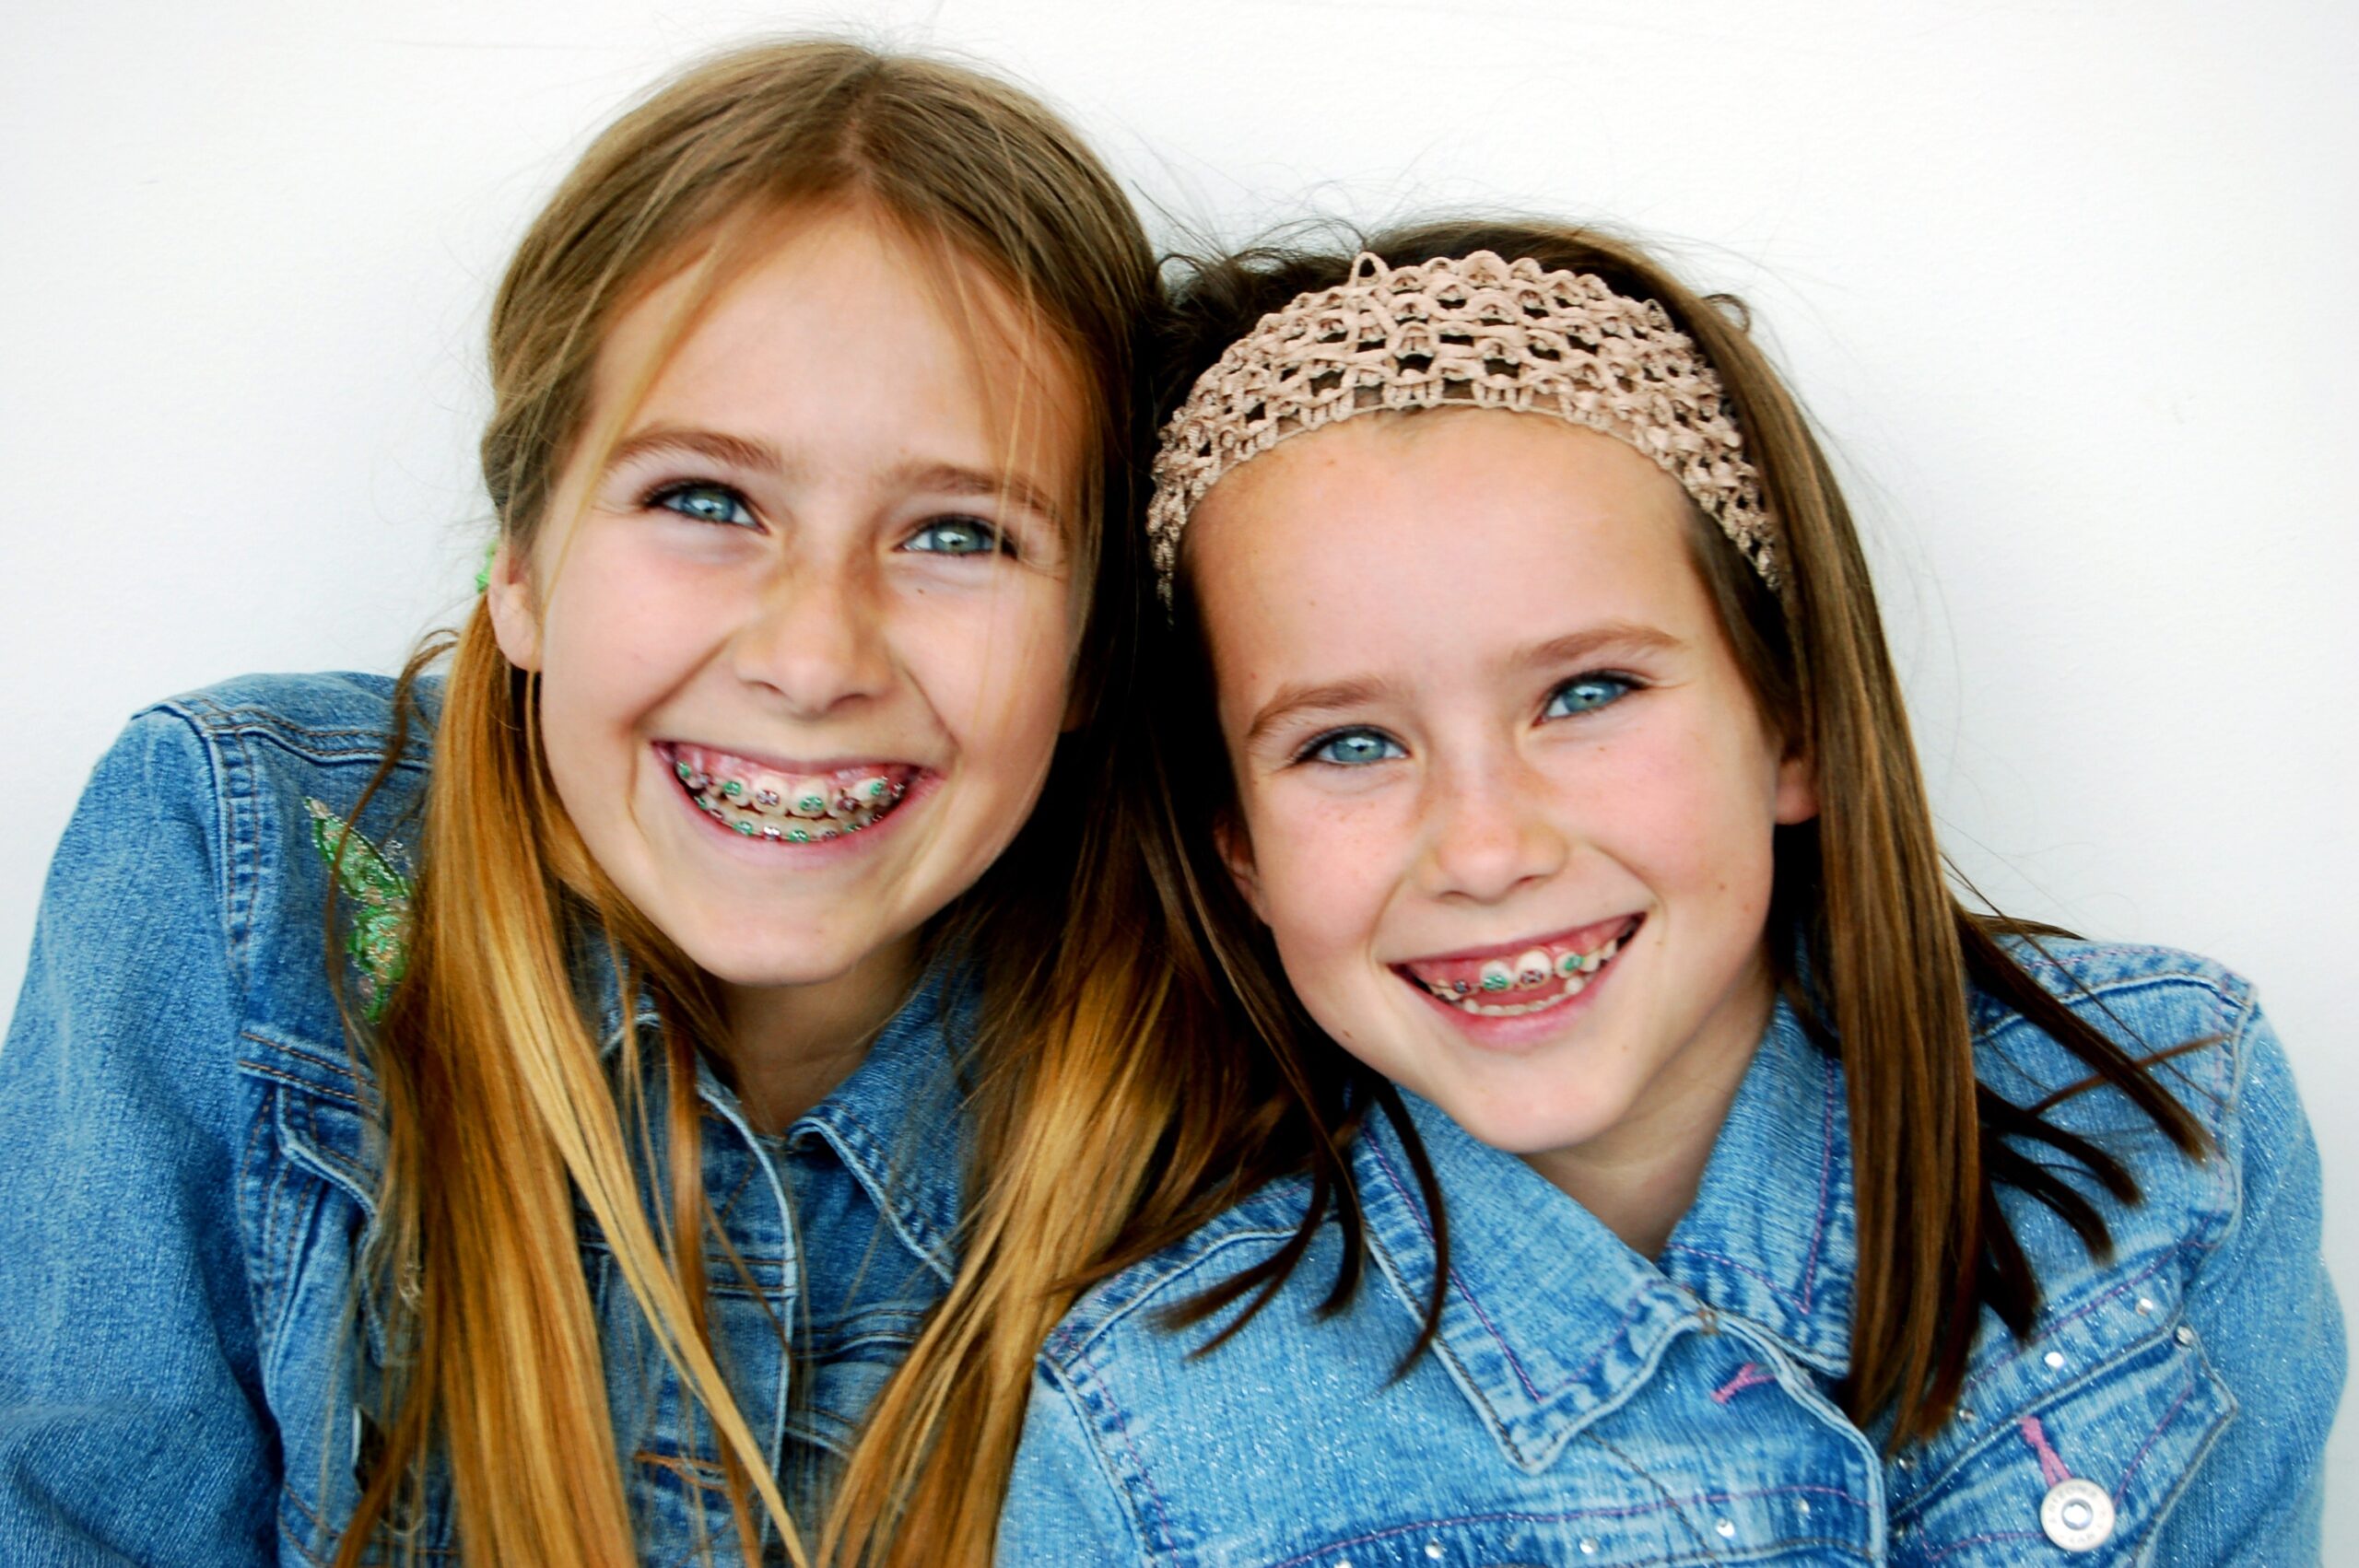 What Do Rubber Bands Do For Braces?, Tender Smiles 4 Kids